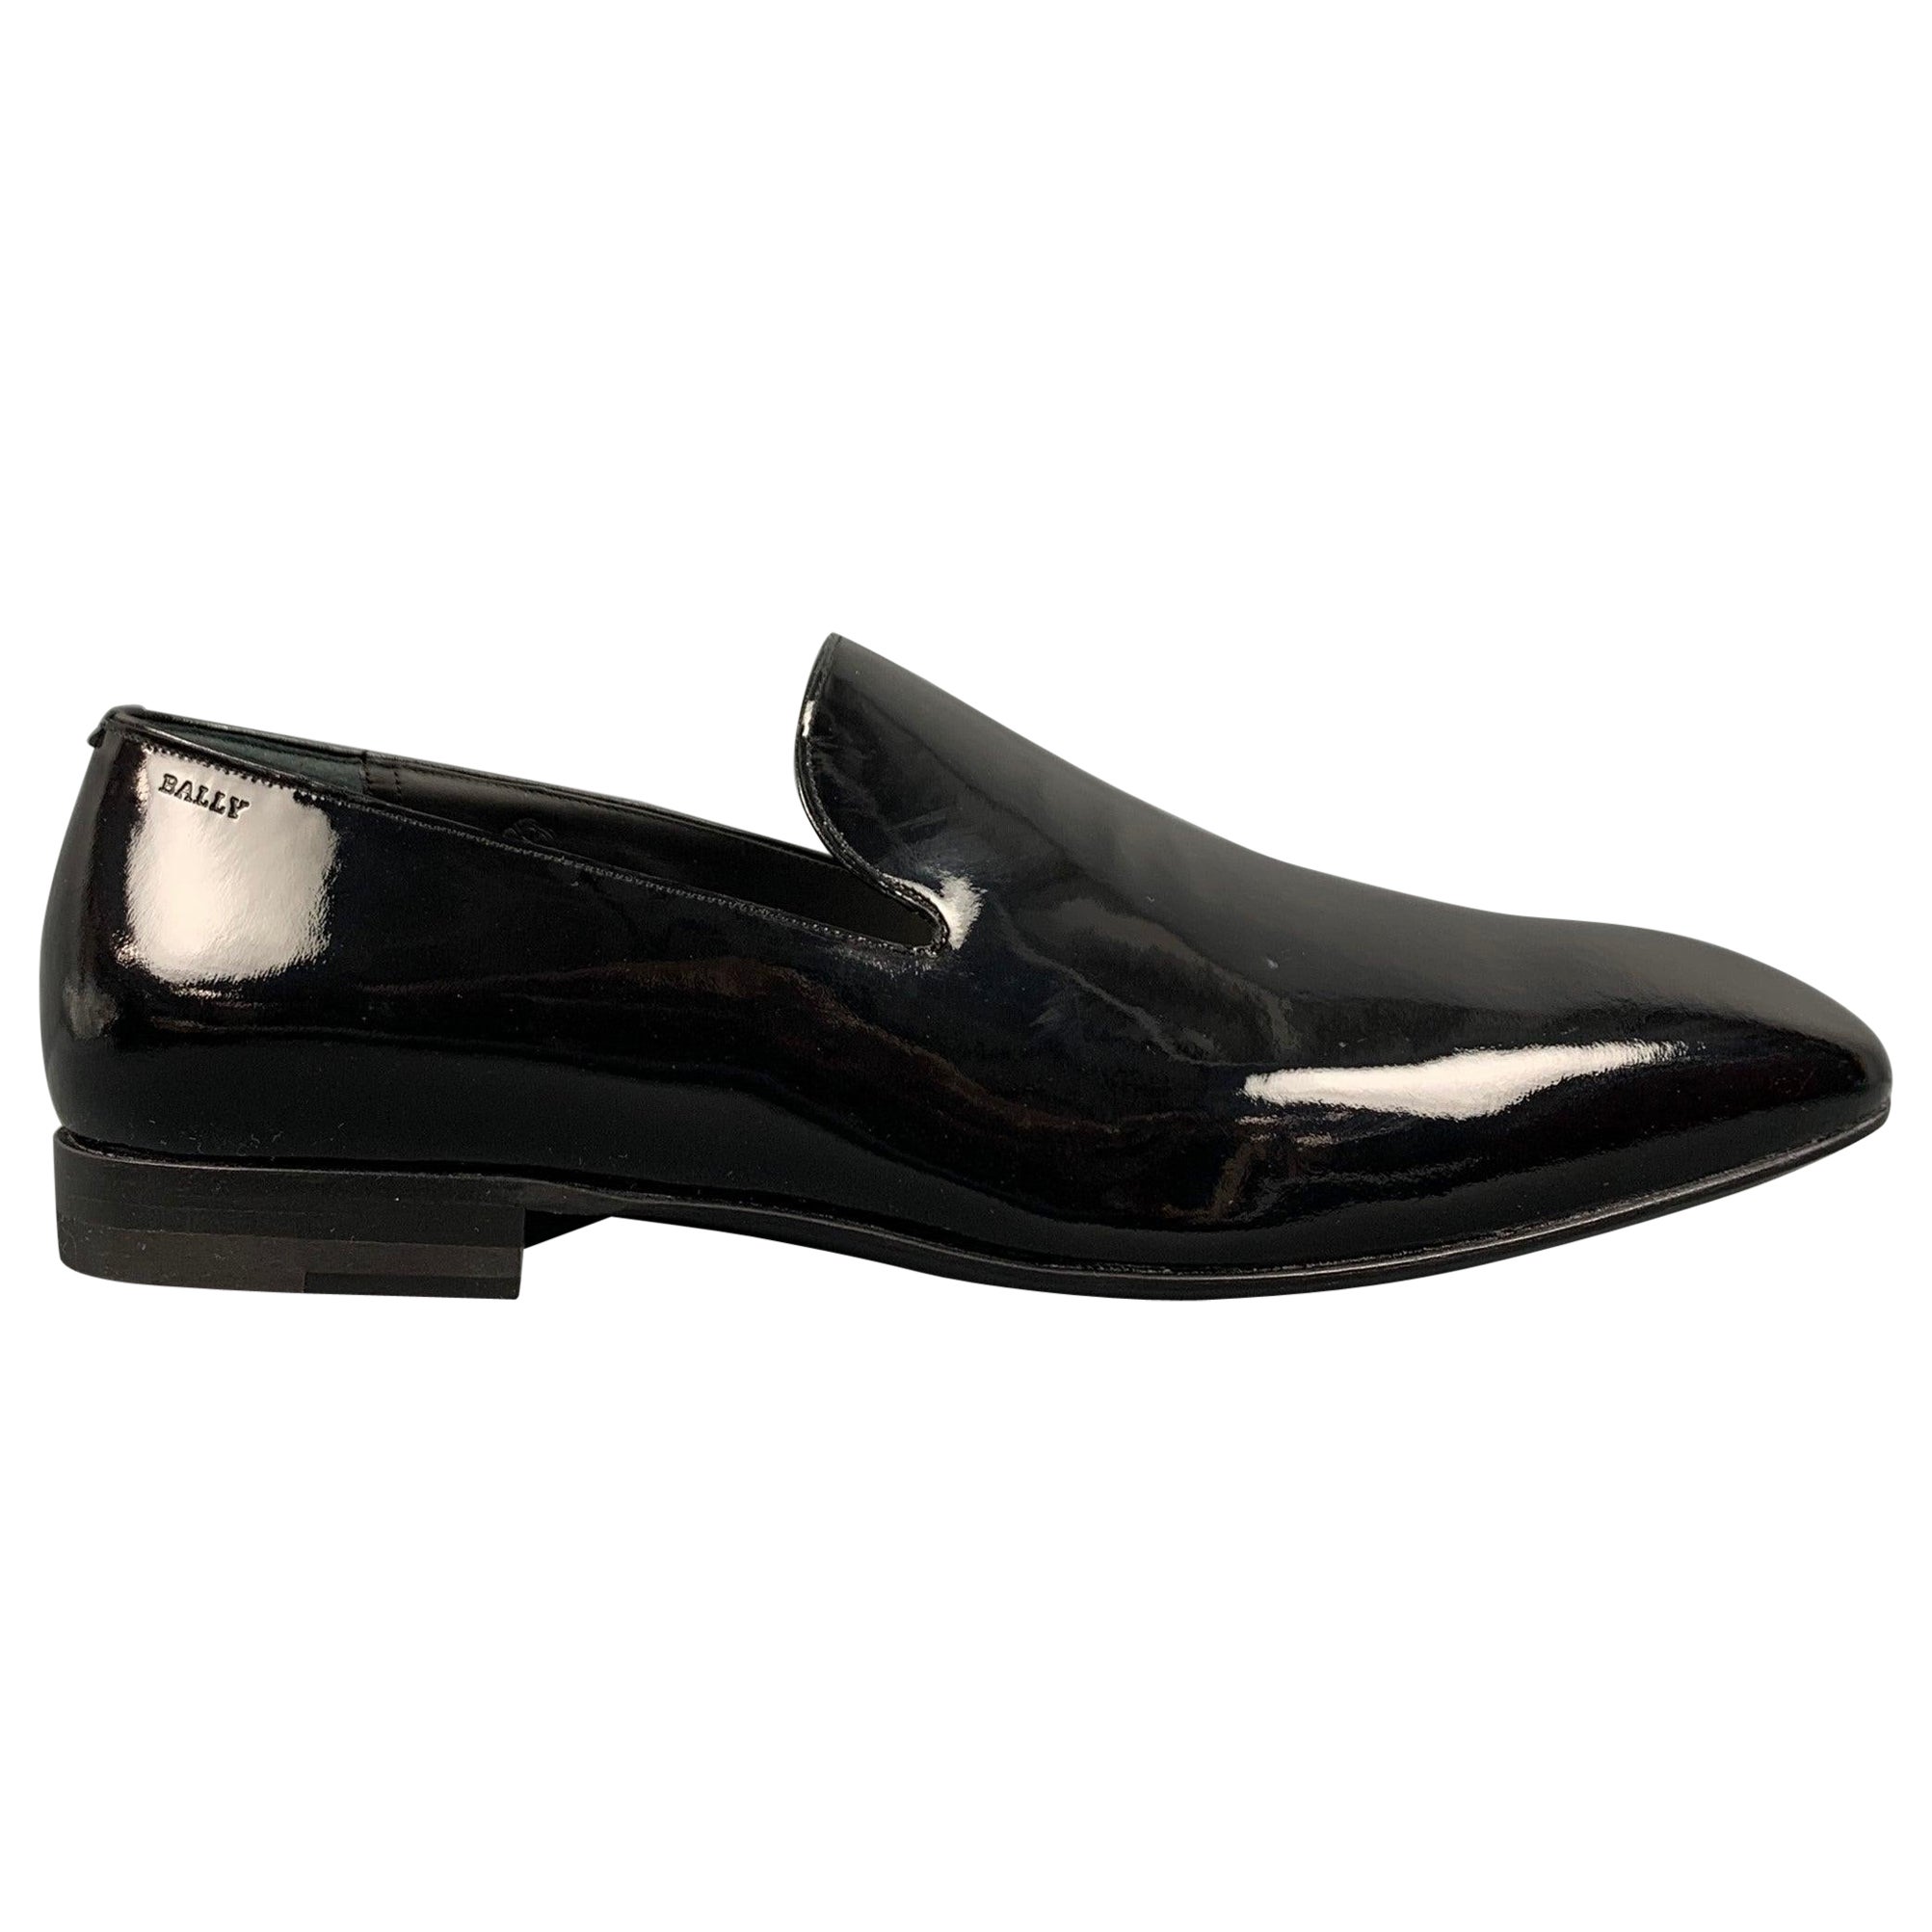 BALLY Size 7.5 Black Patent Leather Slip On Loafers For Sale